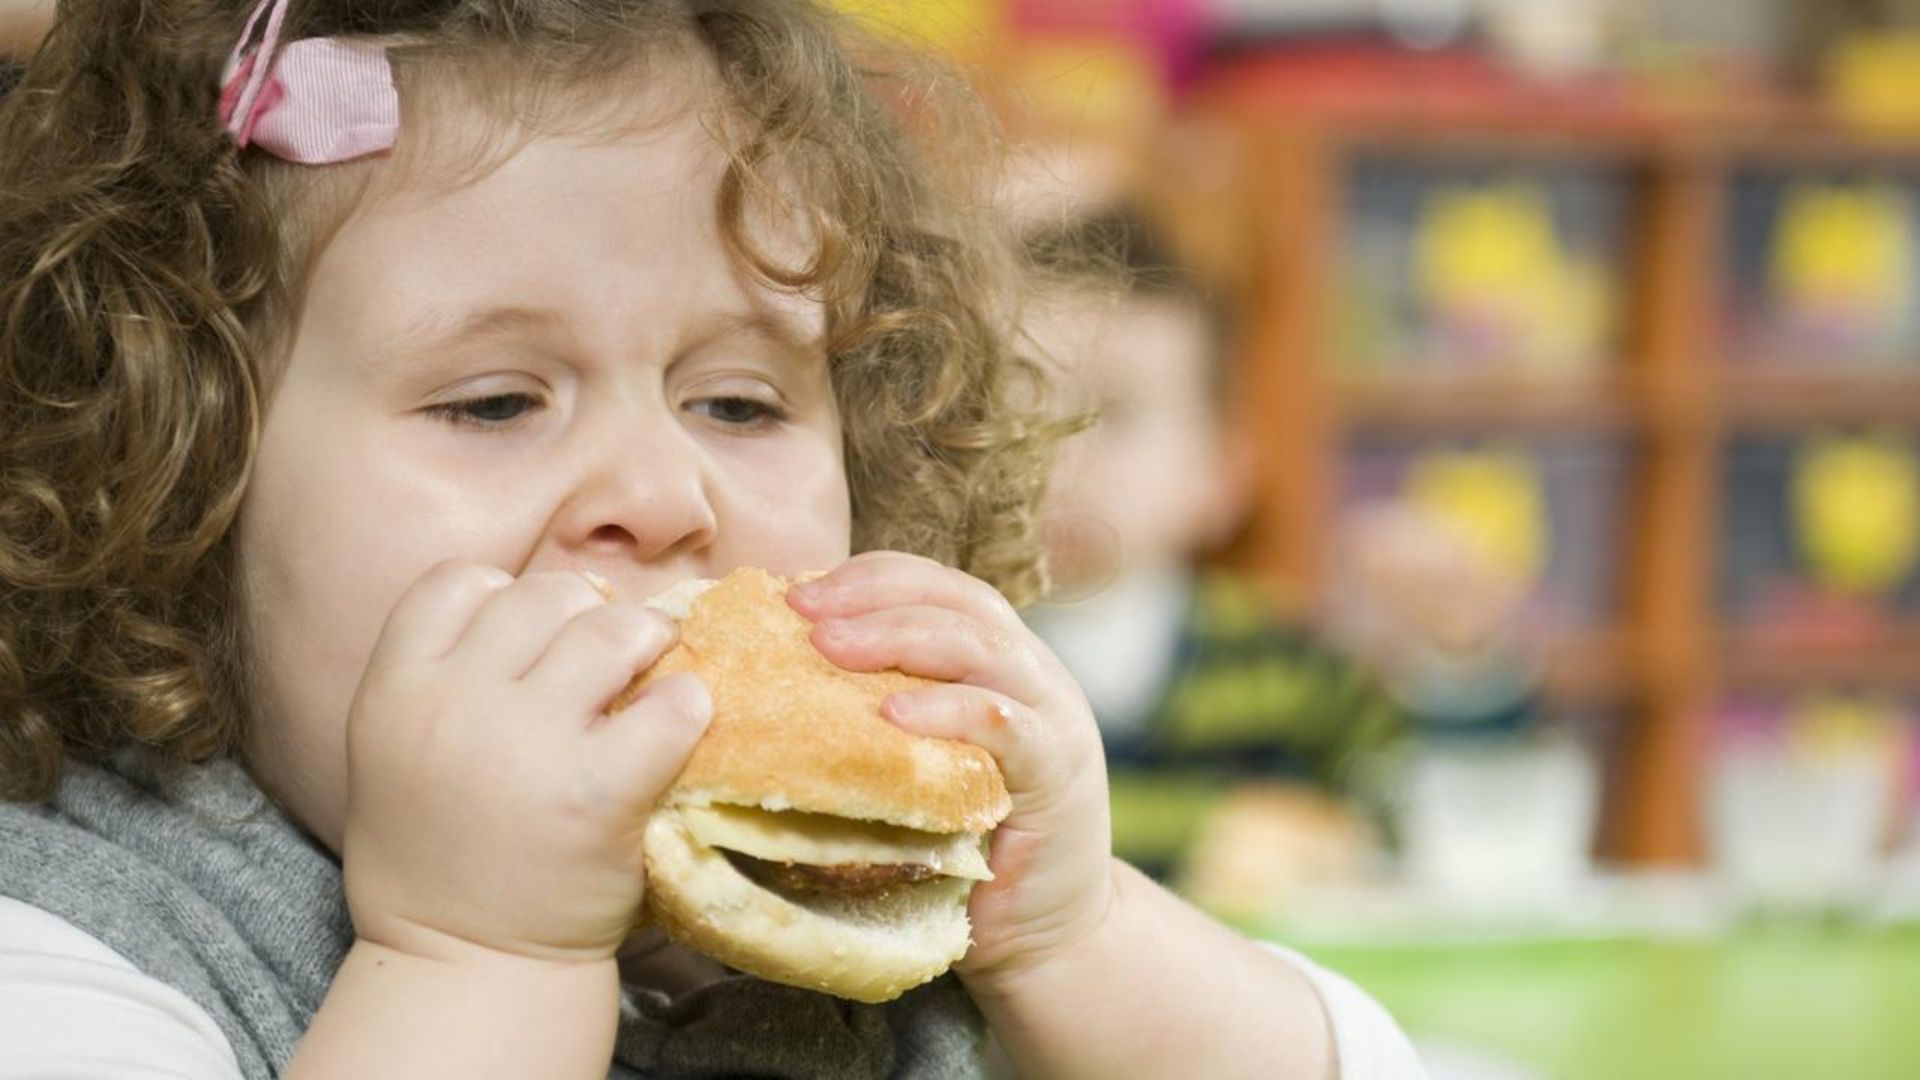 Childhood Obesity Prevalence and Its Implications for Health